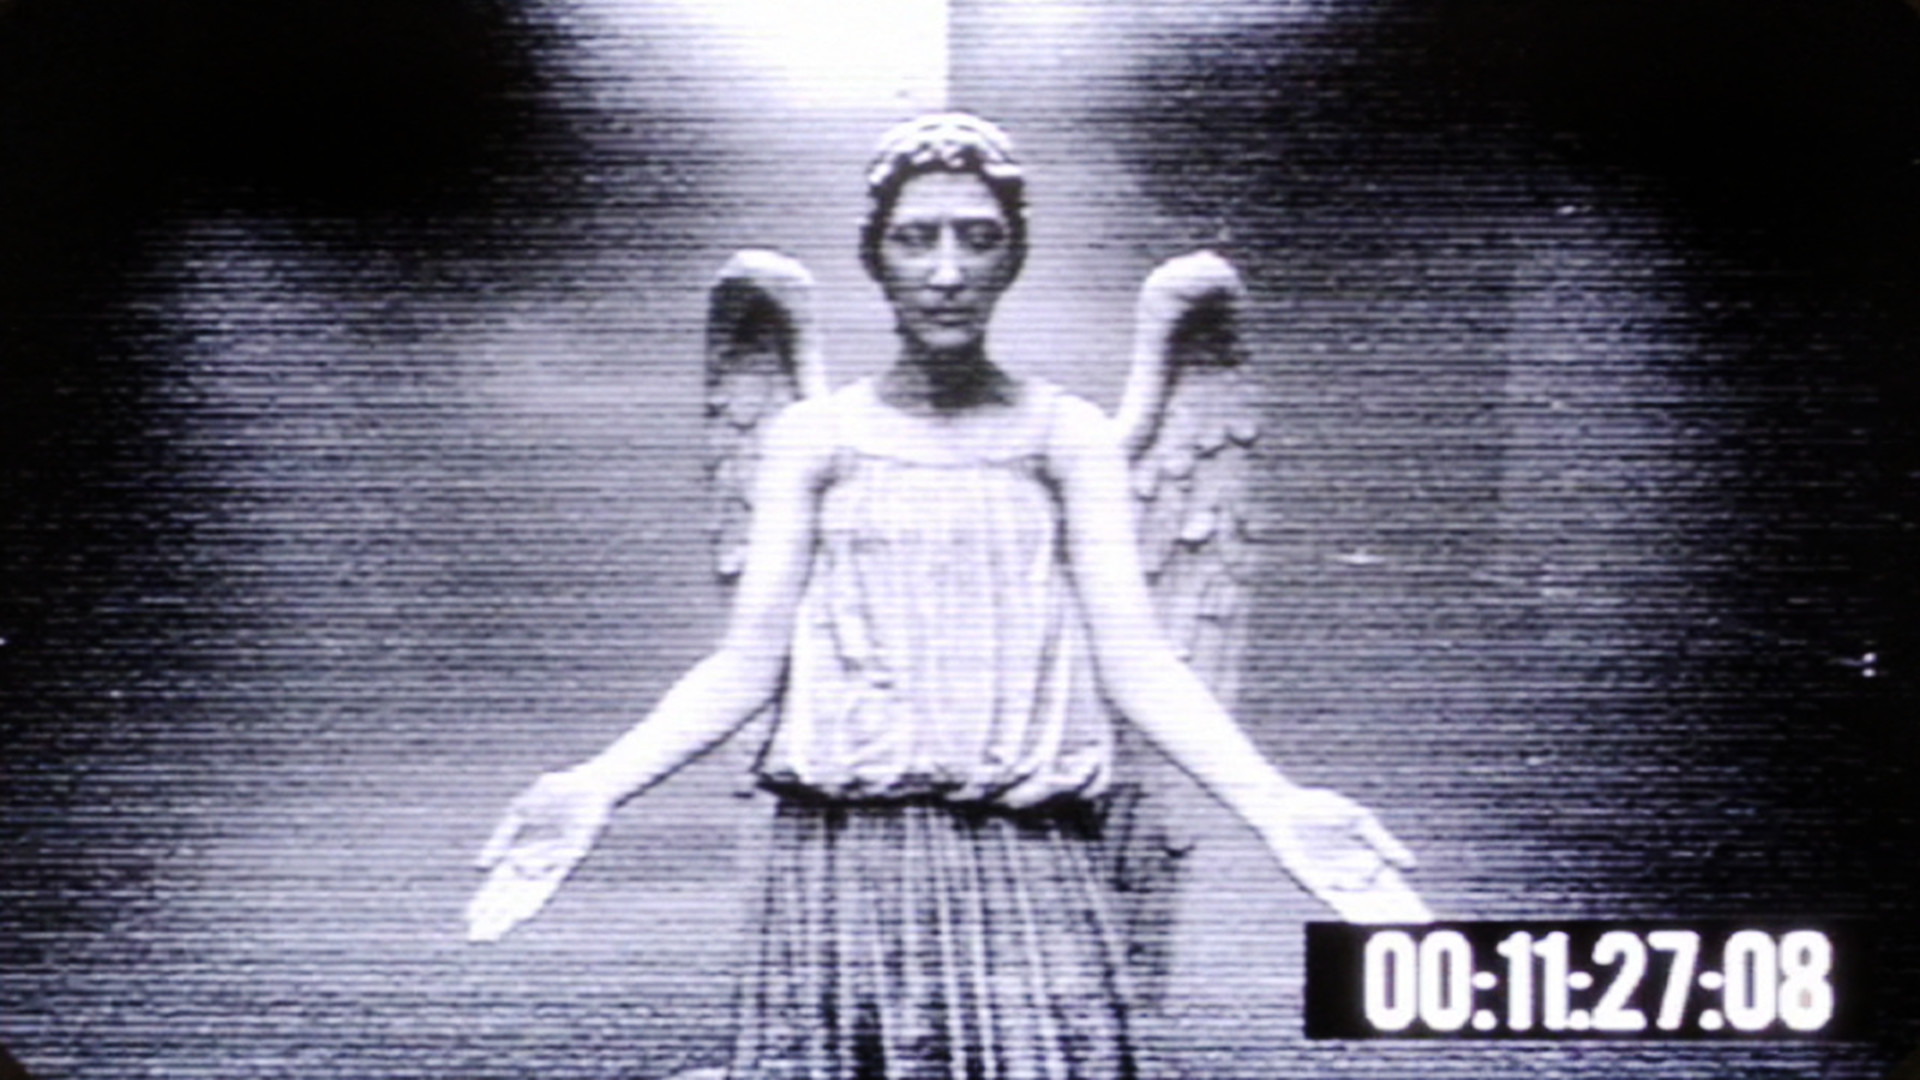 Weeping Angels wallpapers. Set it to change every few seconds for some fun